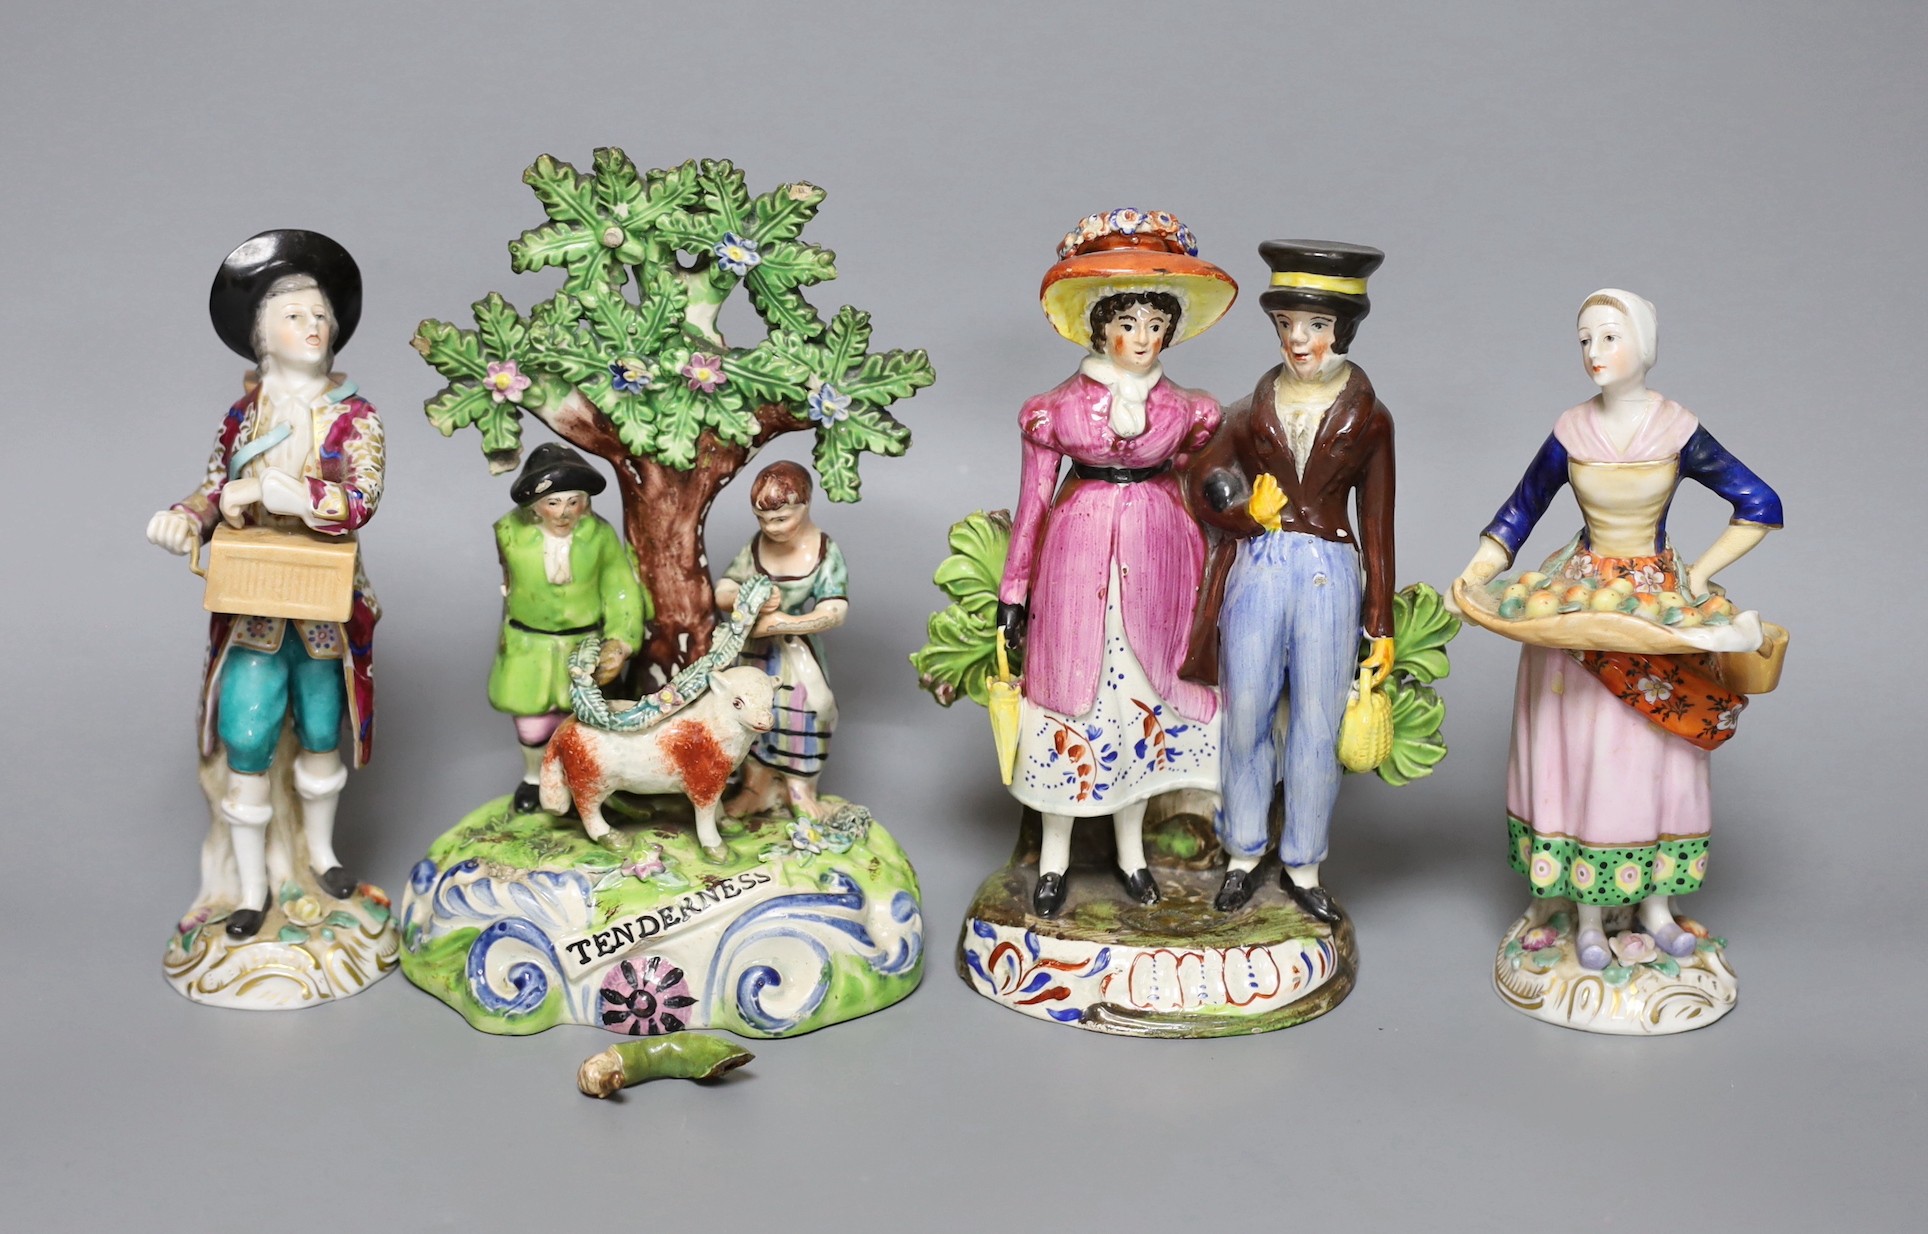 A Walton pearlware group ‘Tenderness’, a Walton type pearlware group of a couple, c.1820, and two Continental porcelain figures, tallest 18.5cm